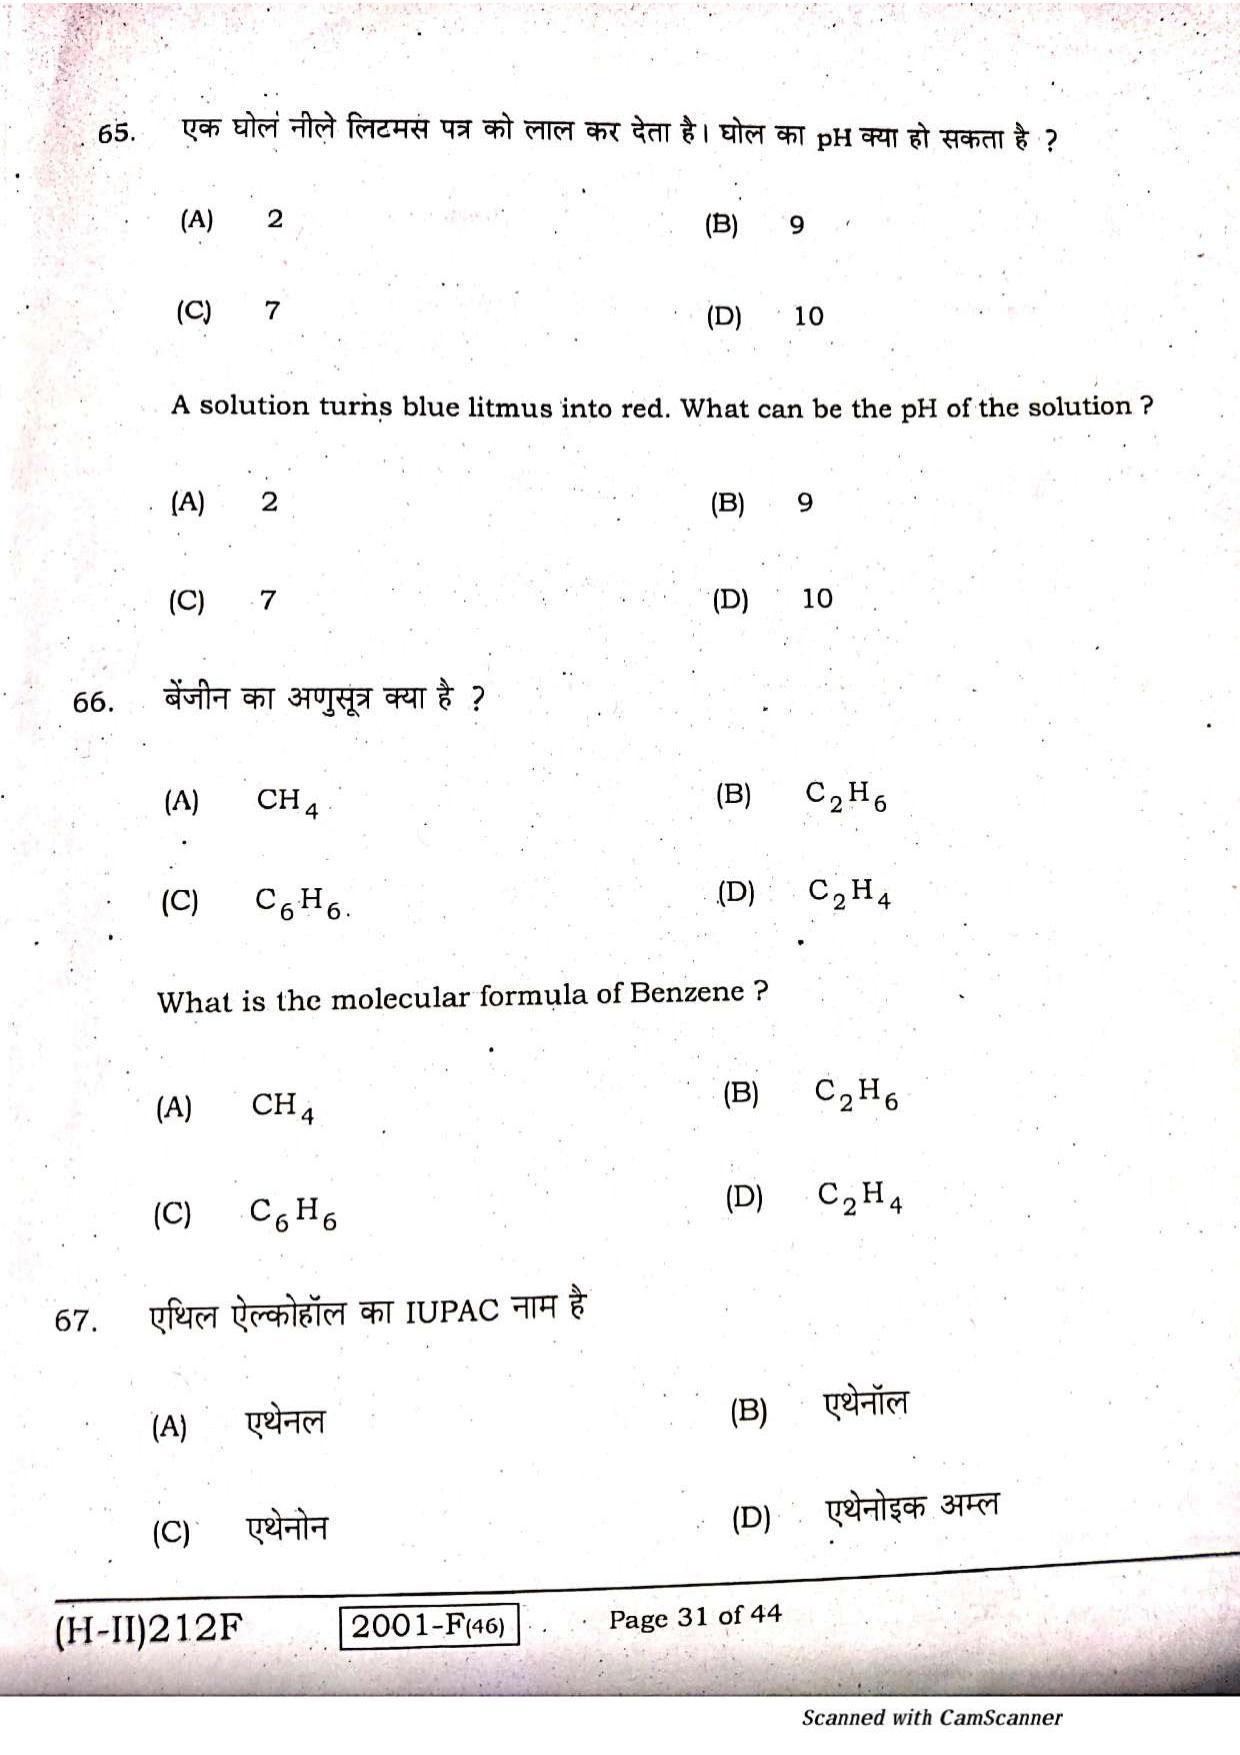 Bihar Board Class 10 Science 2021 (2nd Sitting) Question Paper - Page 29